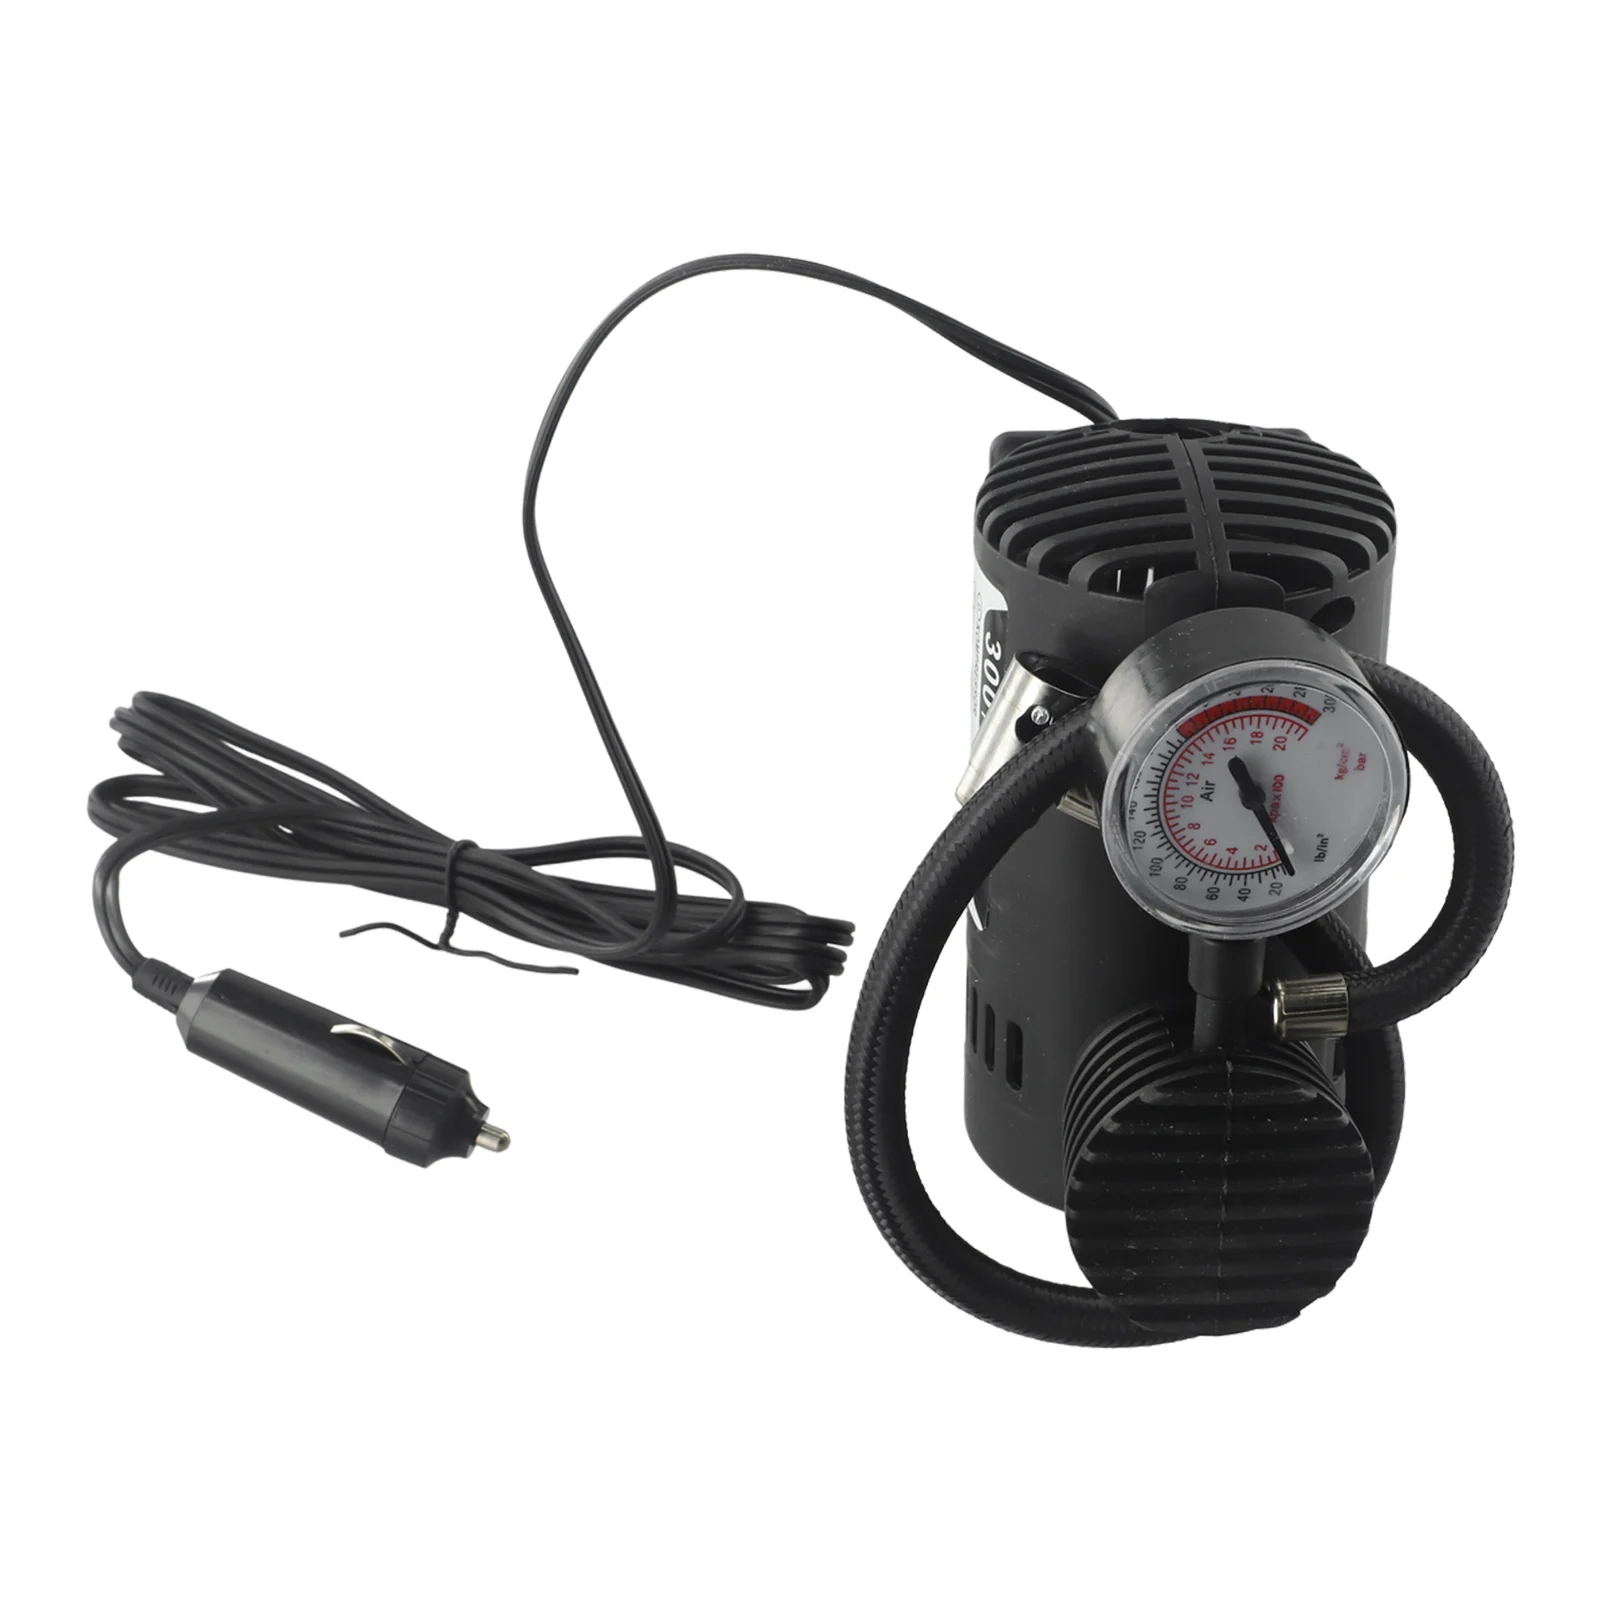 

12V Car Electric Air Pump 300psi Air Compressor Pump Tire Tyre Inflator With Digital Pressure Gauge For Auto Motorcycle Bicycle